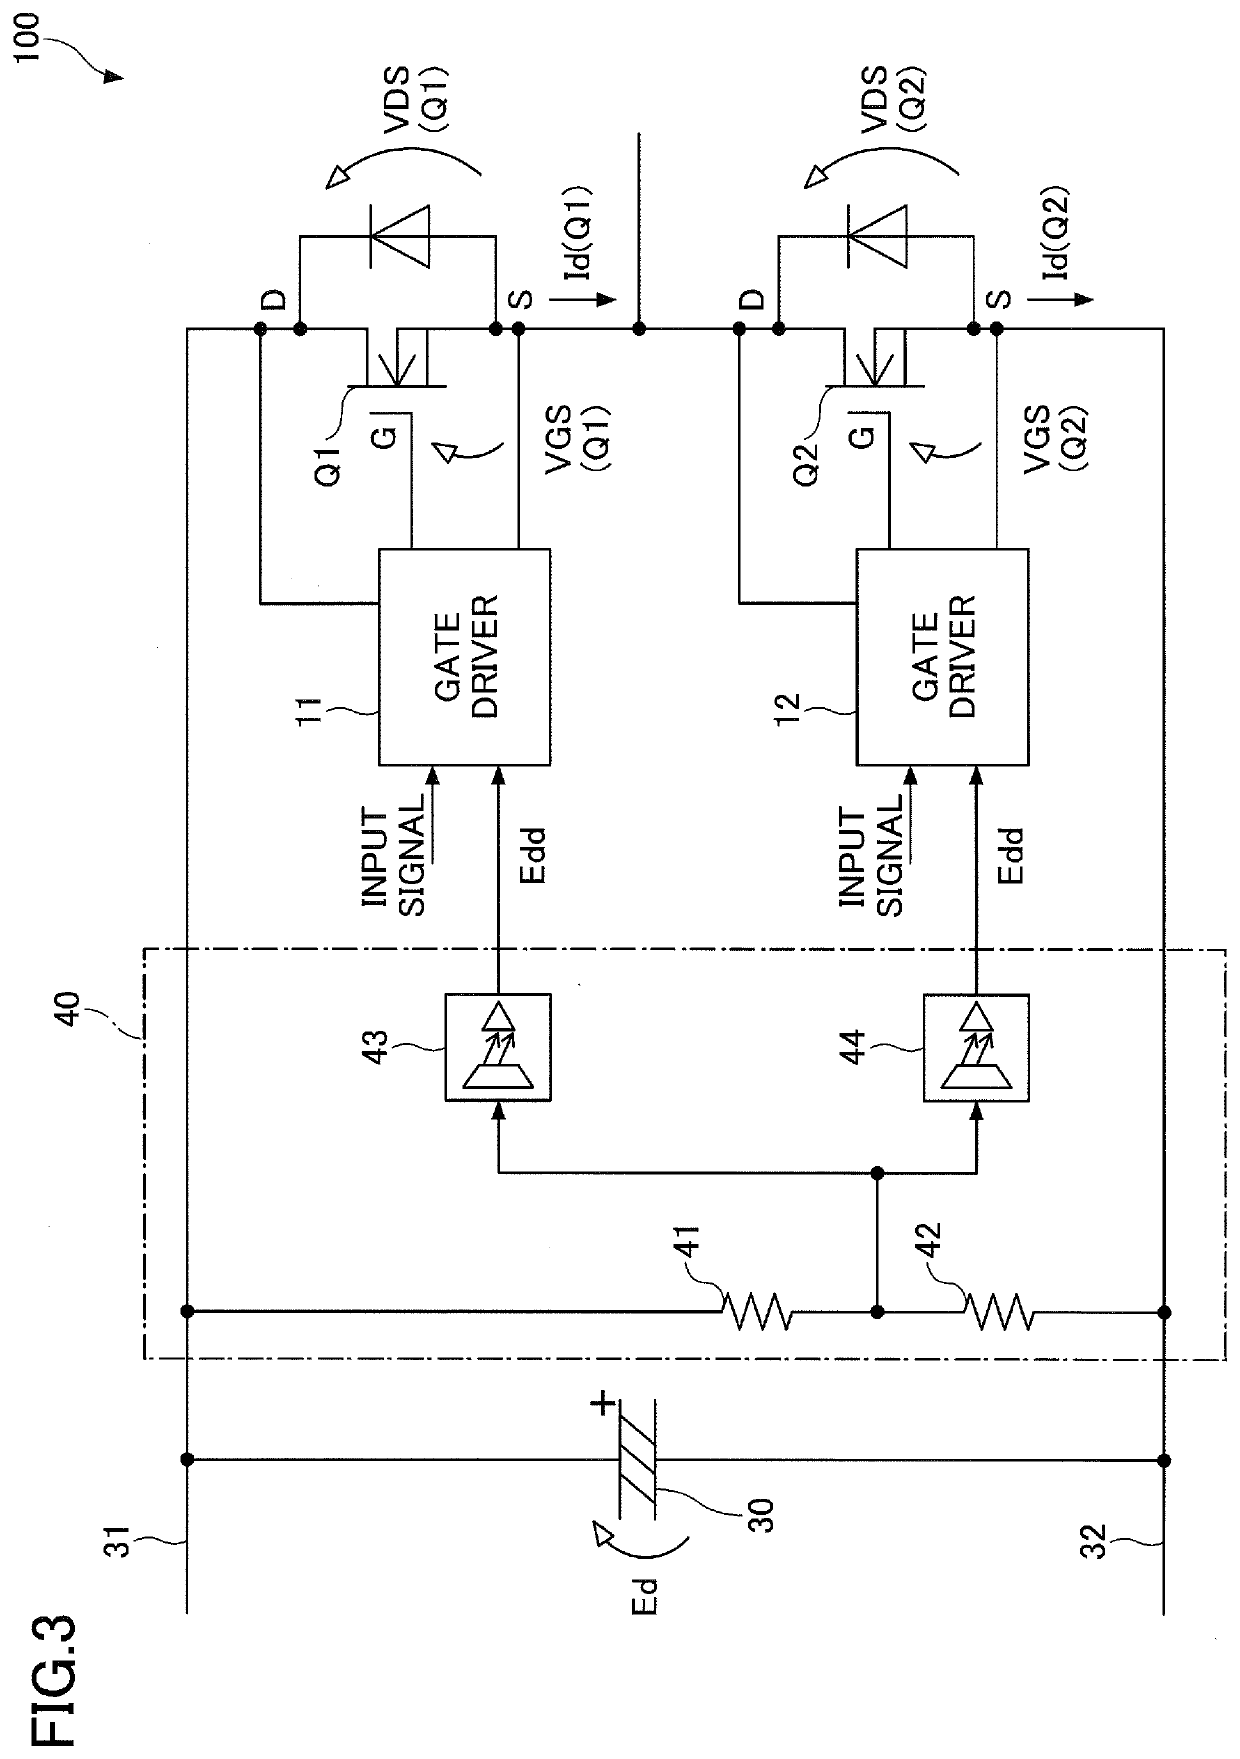 Gate driver and power converter